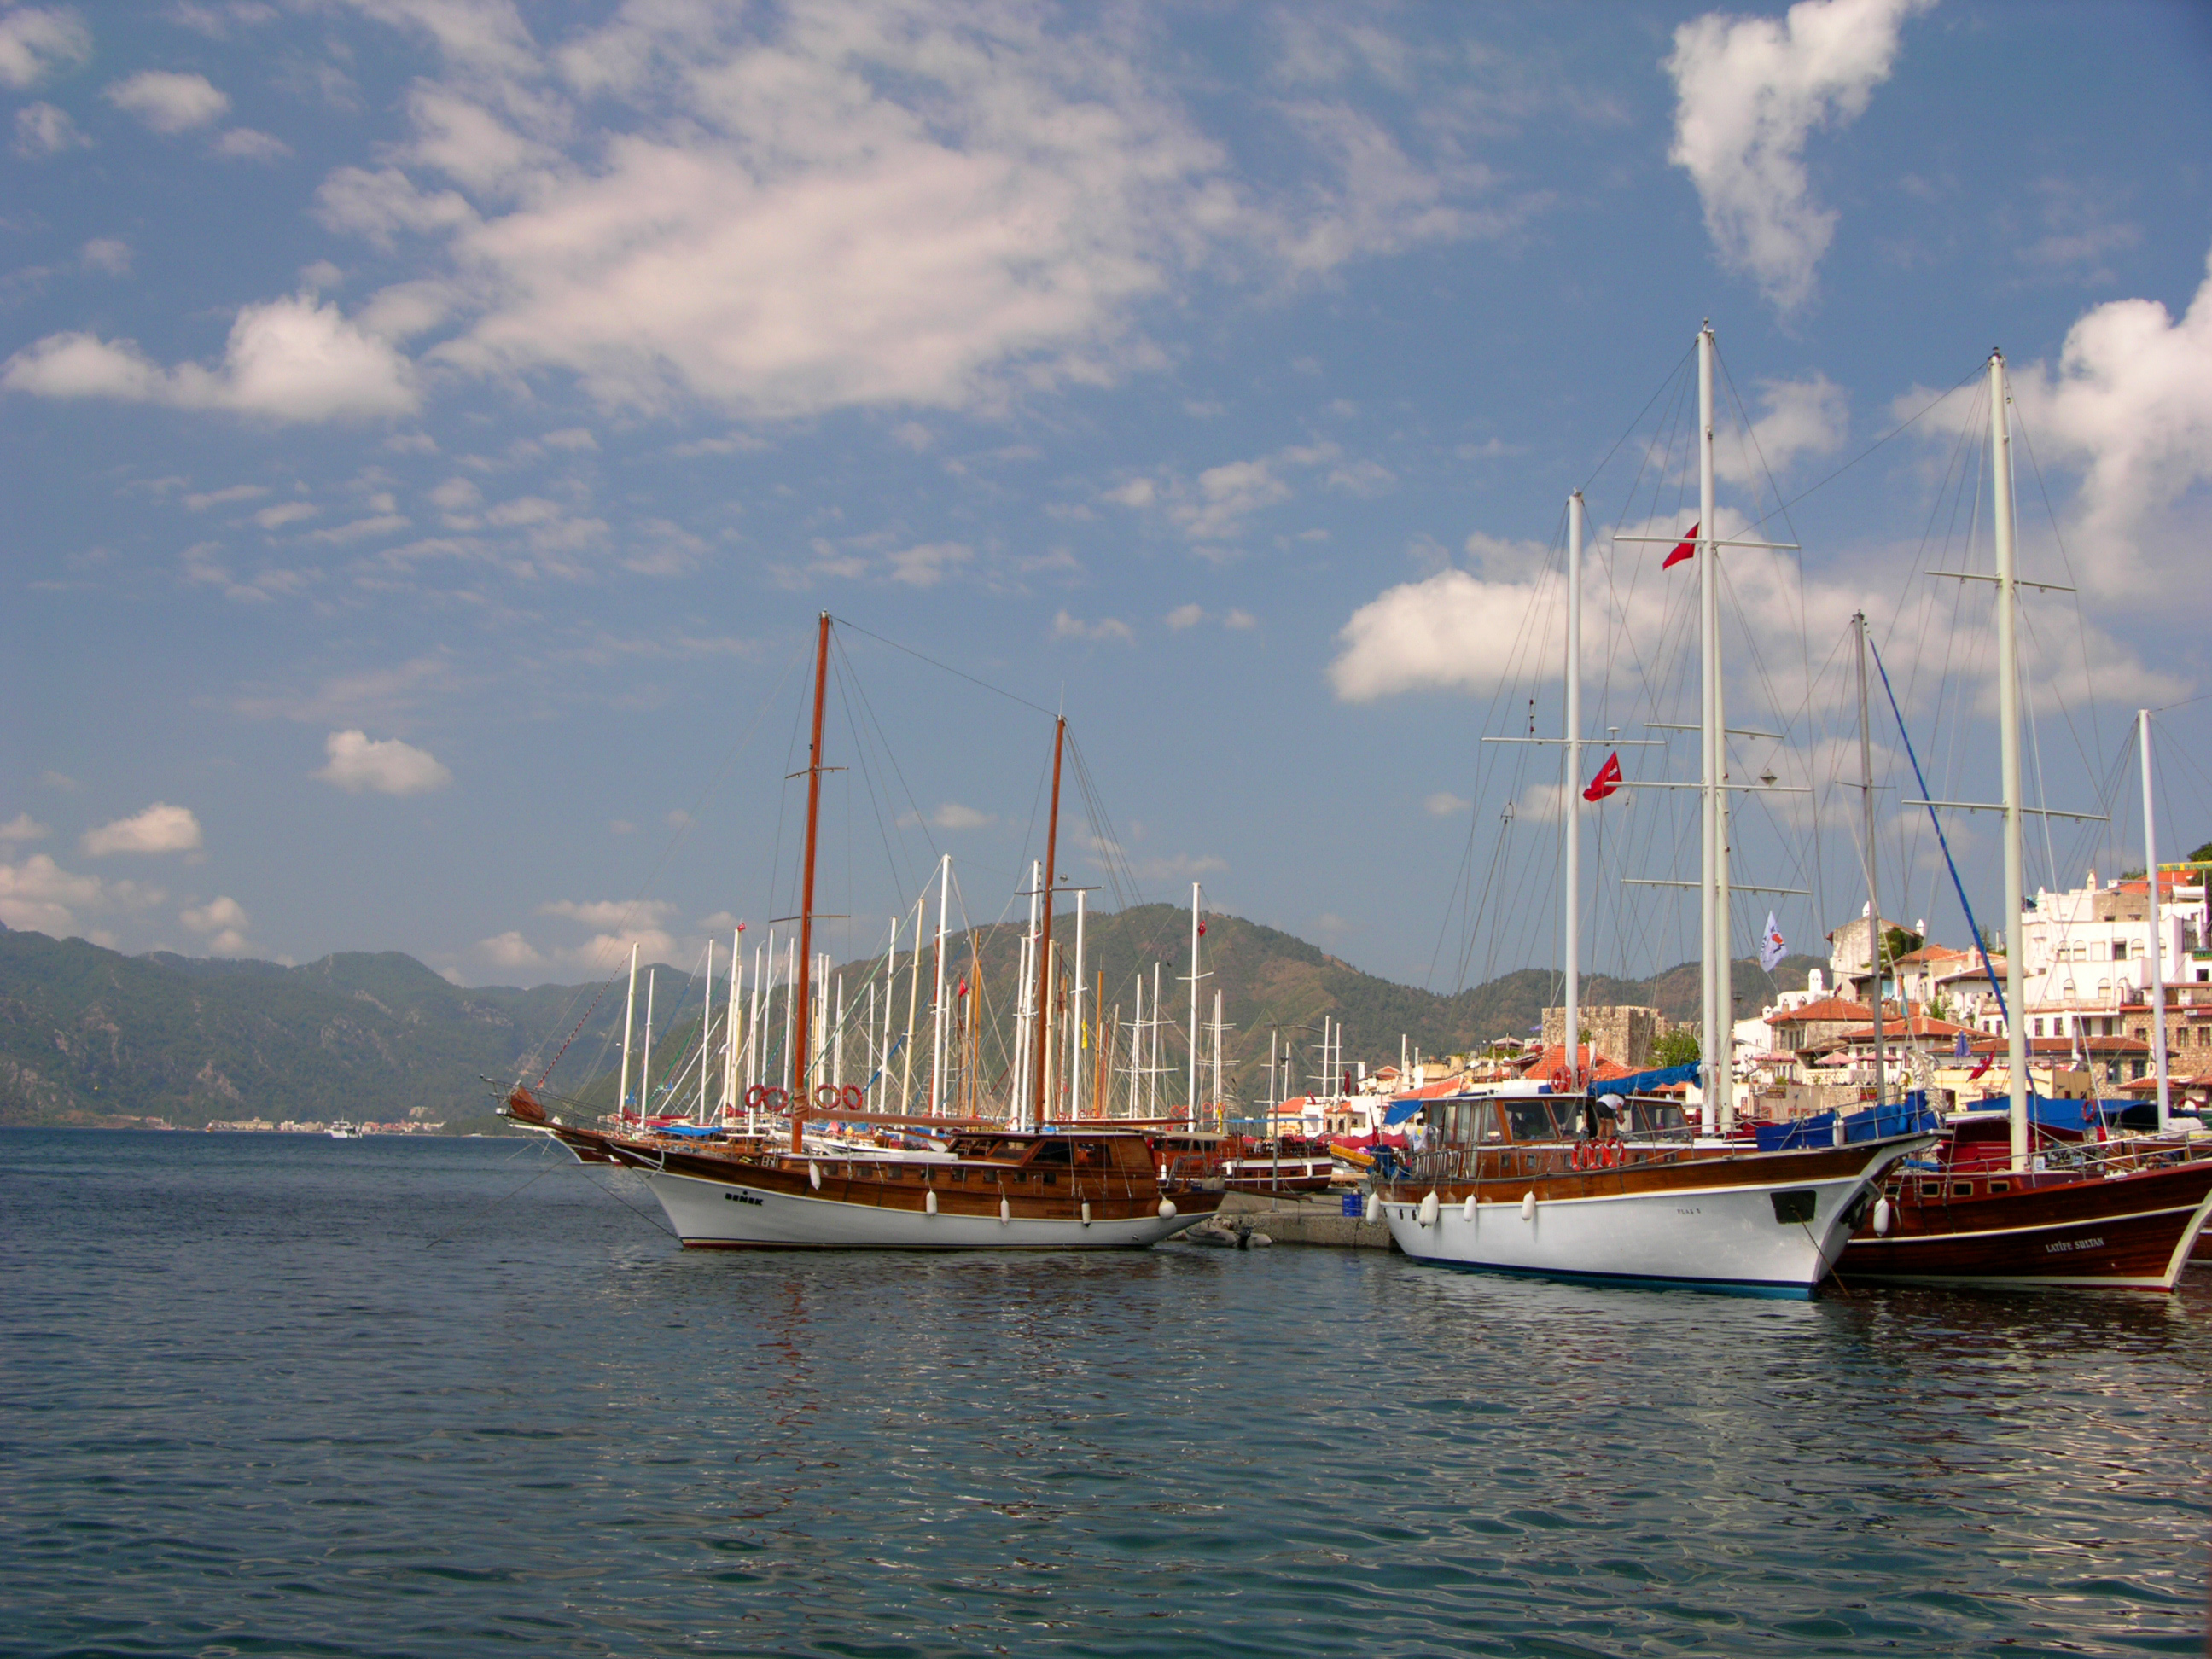 Yachts moored on a pier in Marmaris